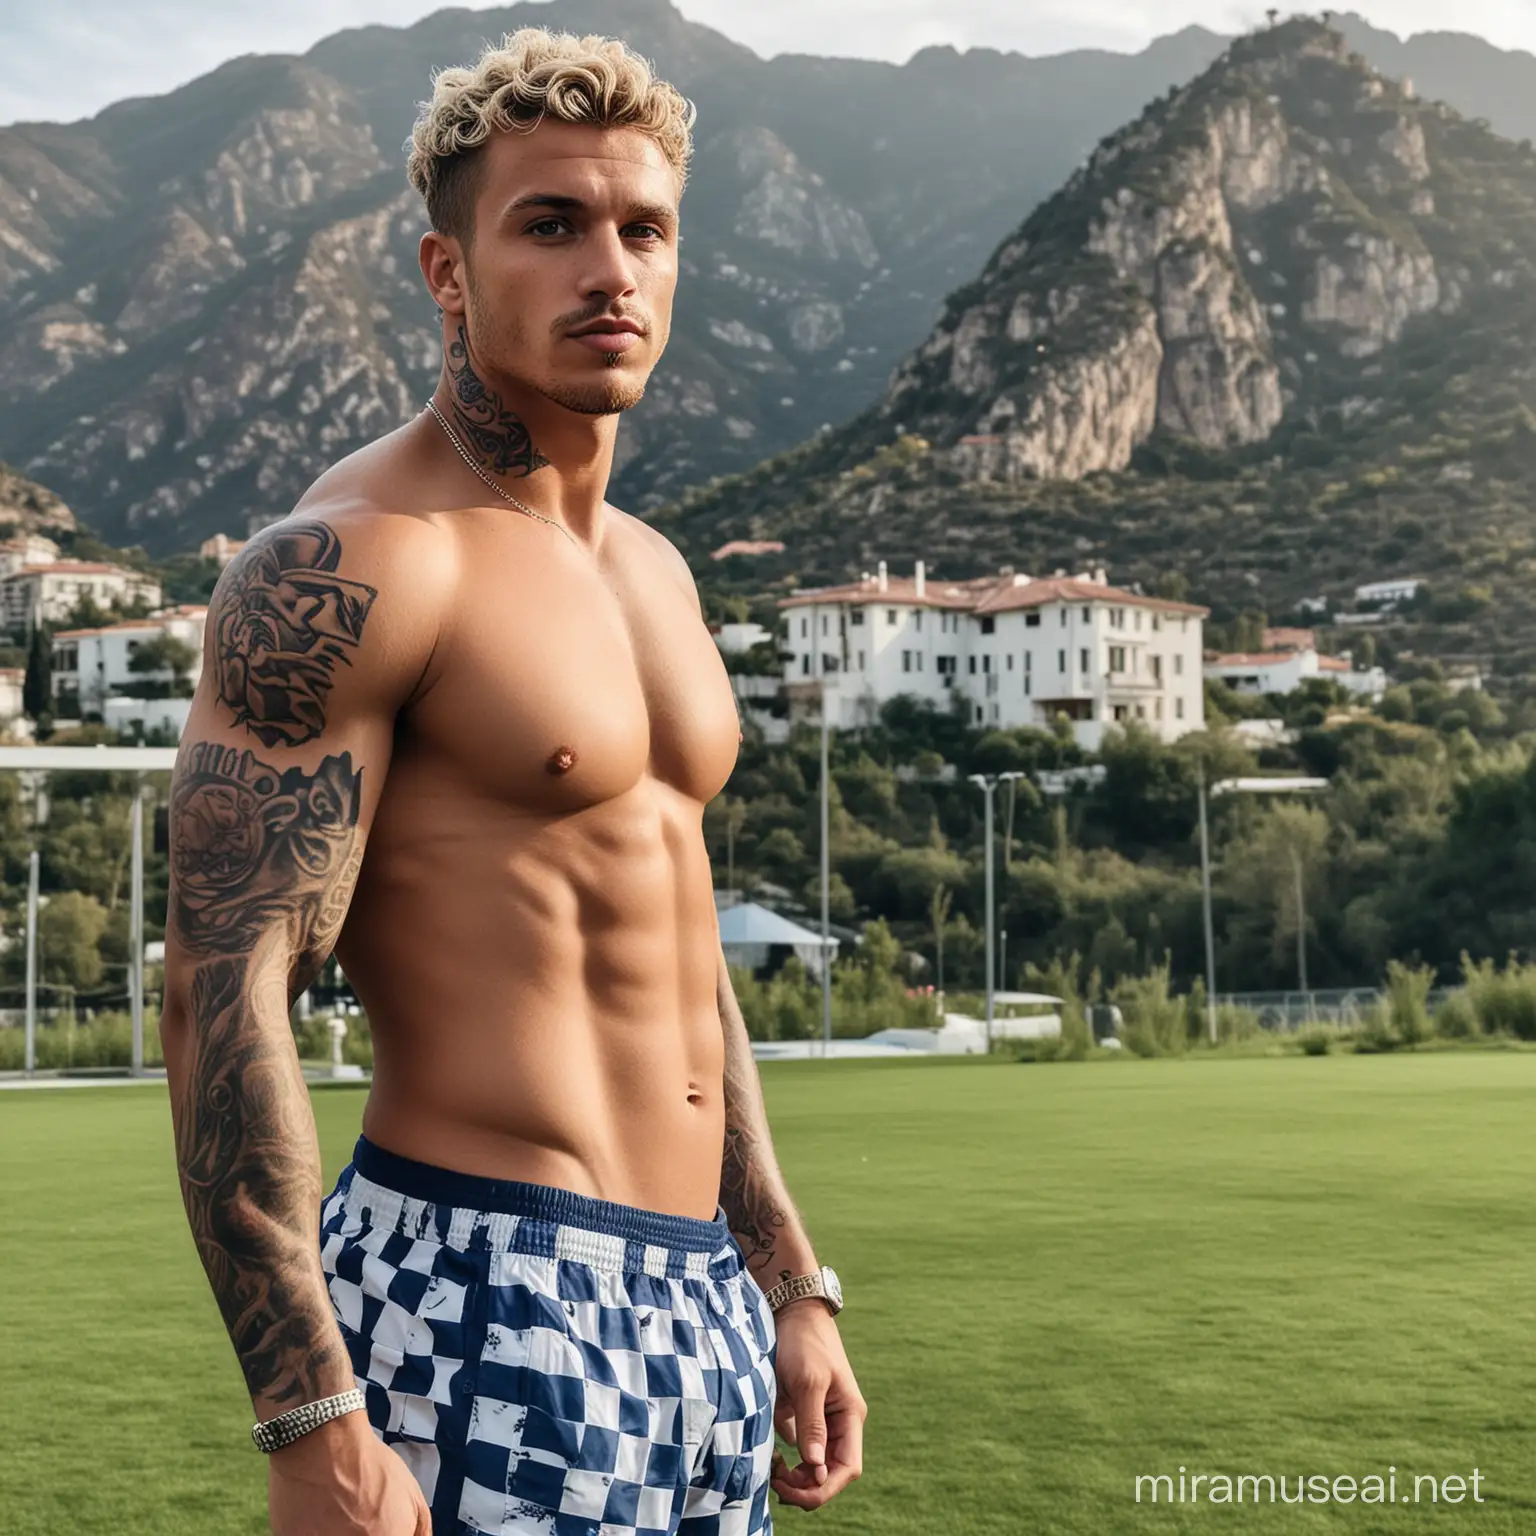 generate a picture of a muscular man who is a football player, has a checkered stomach and a big penis, has light brown short curly hair and blue color, he has tattoos on his arms. This man has a beautiful wife who is pregnant, the woman is blonde and pink, her hair is blue, they are very rich, the woman is the daughter of a king 👑, and the man is a talented soccer player. in the background there should be a 7-story high luxury villa on the side of the mountain.  